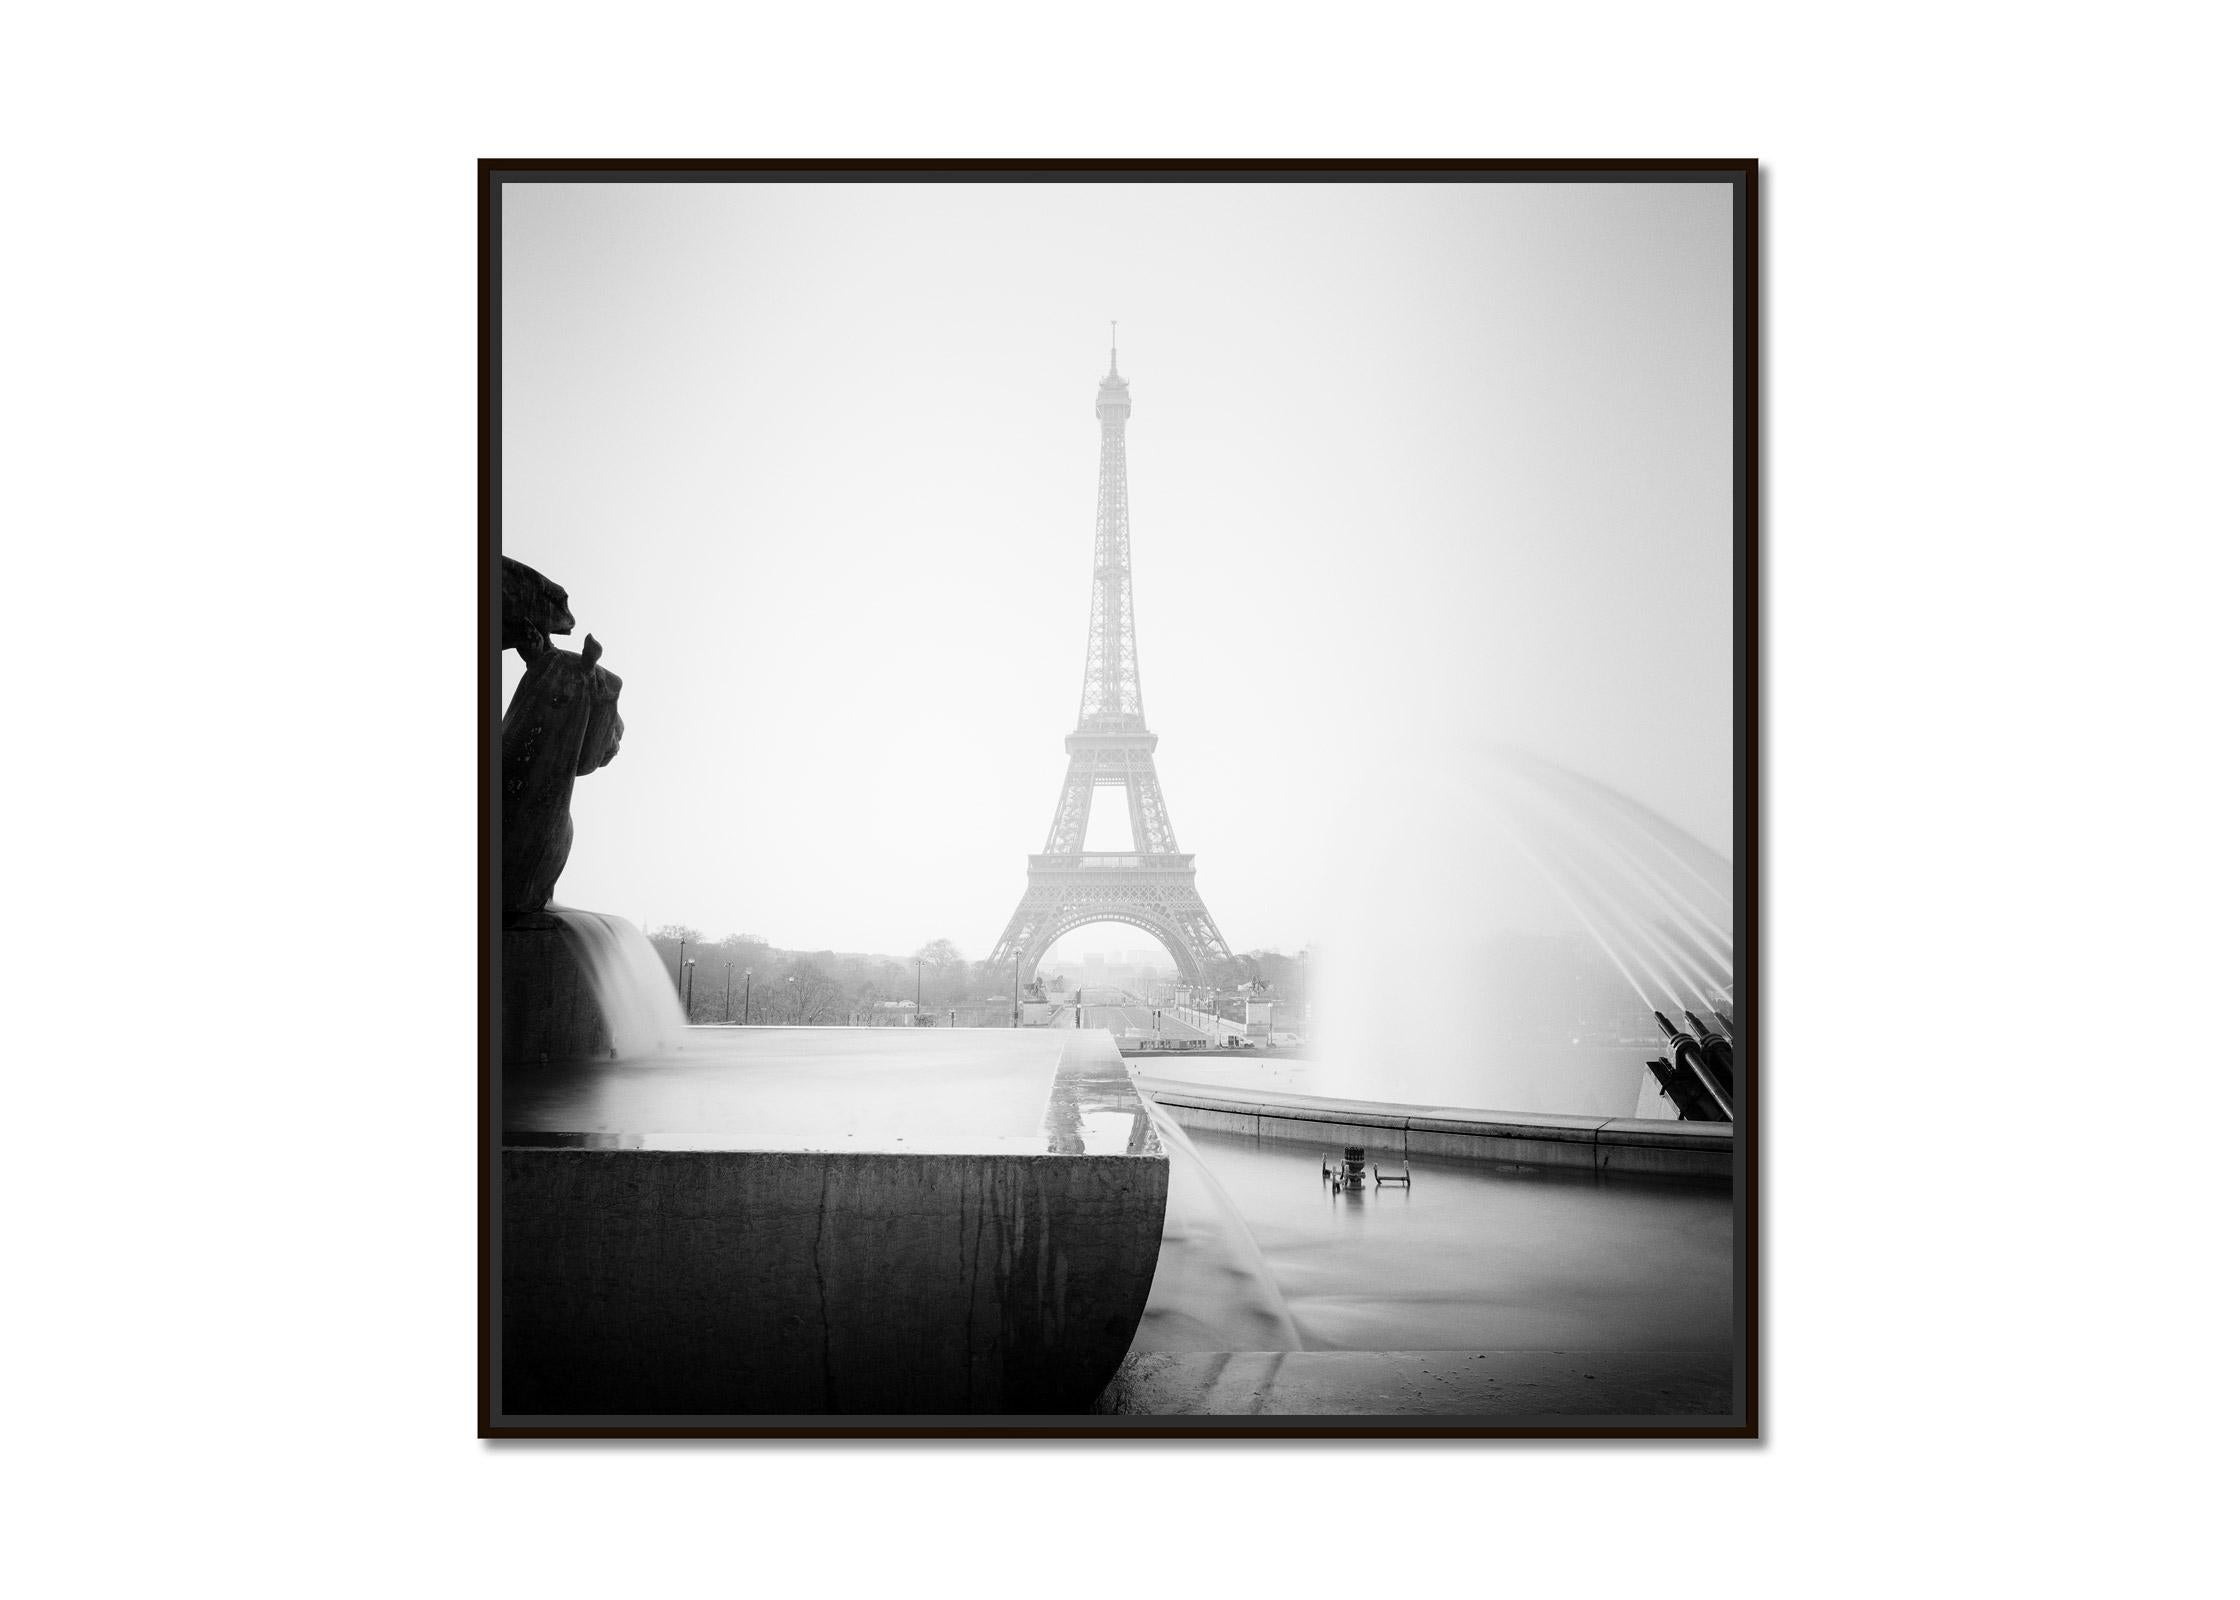 Eiffel Tower, Fontaine Du Trocadero, Paris, black and white fine art photography - Photograph by Gerald Berghammer